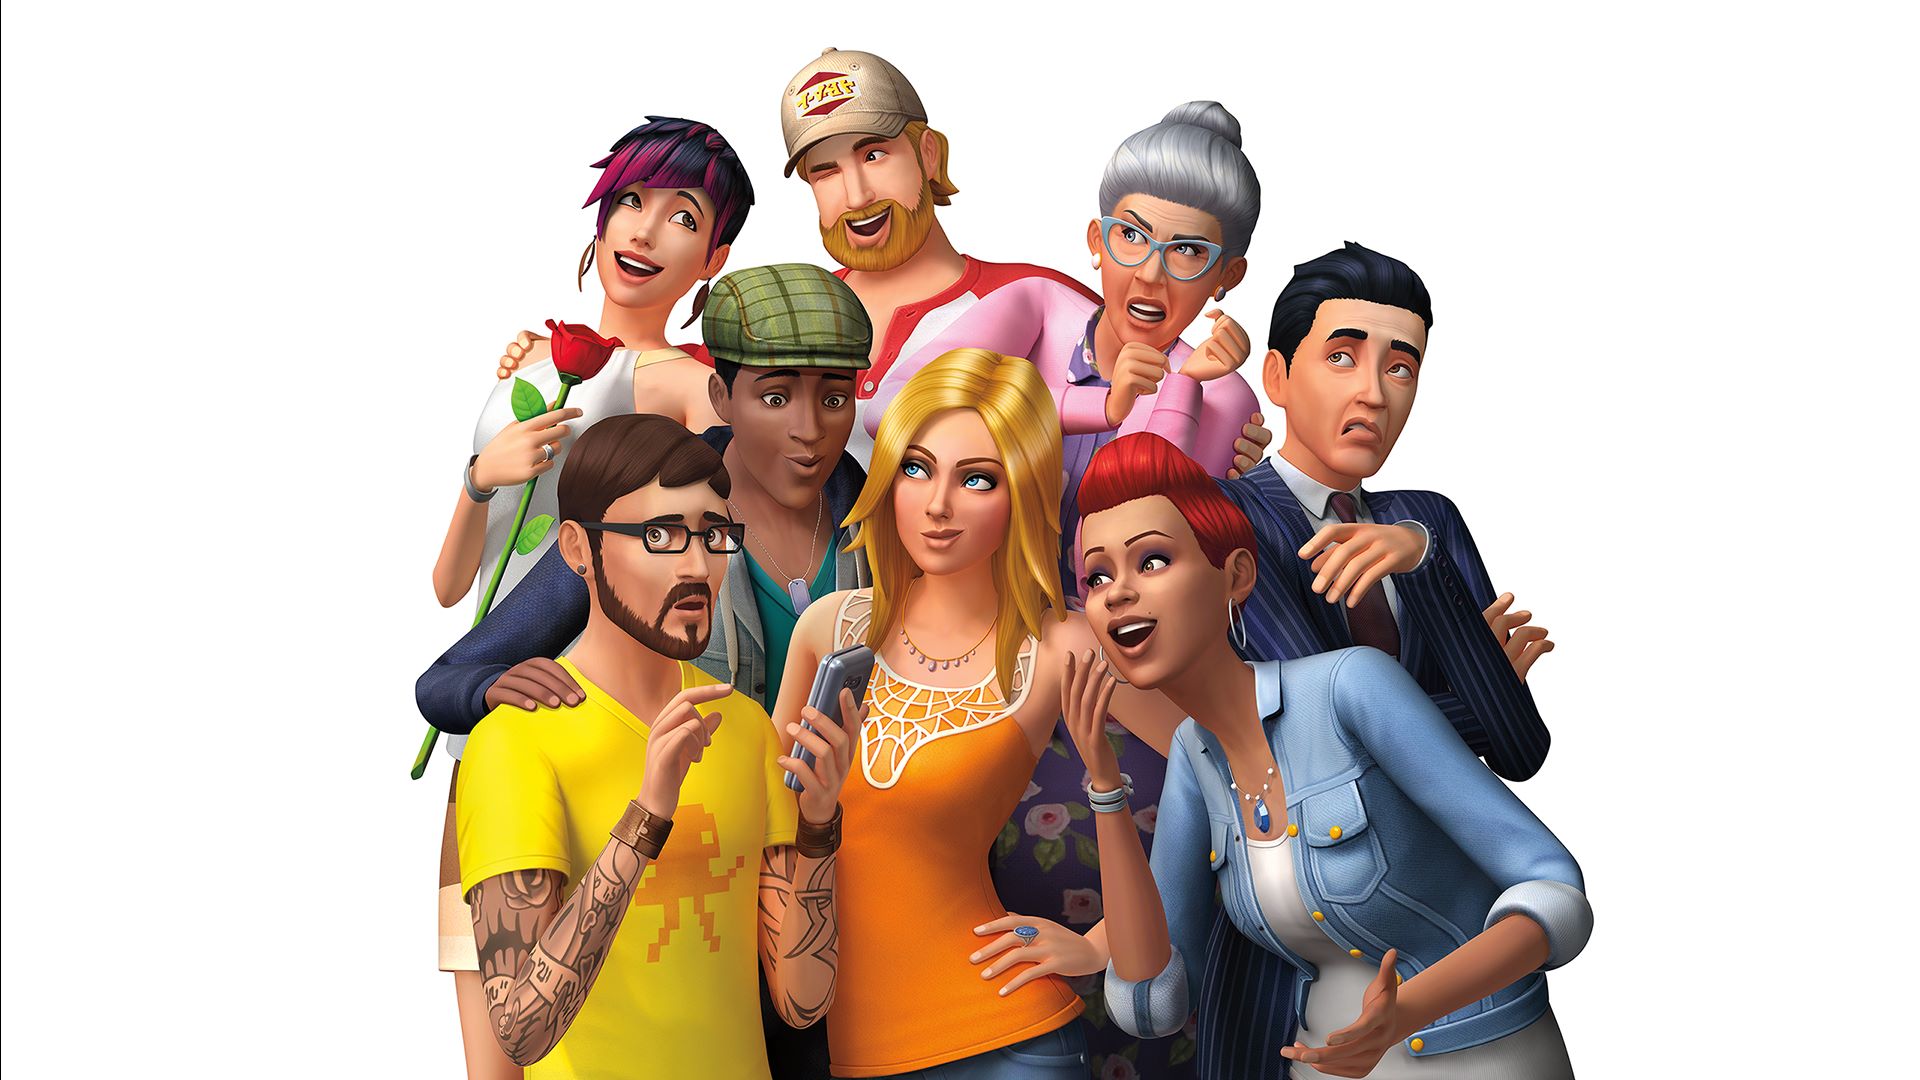 Buy The Sims 4 Microsoft Store - the sims 4